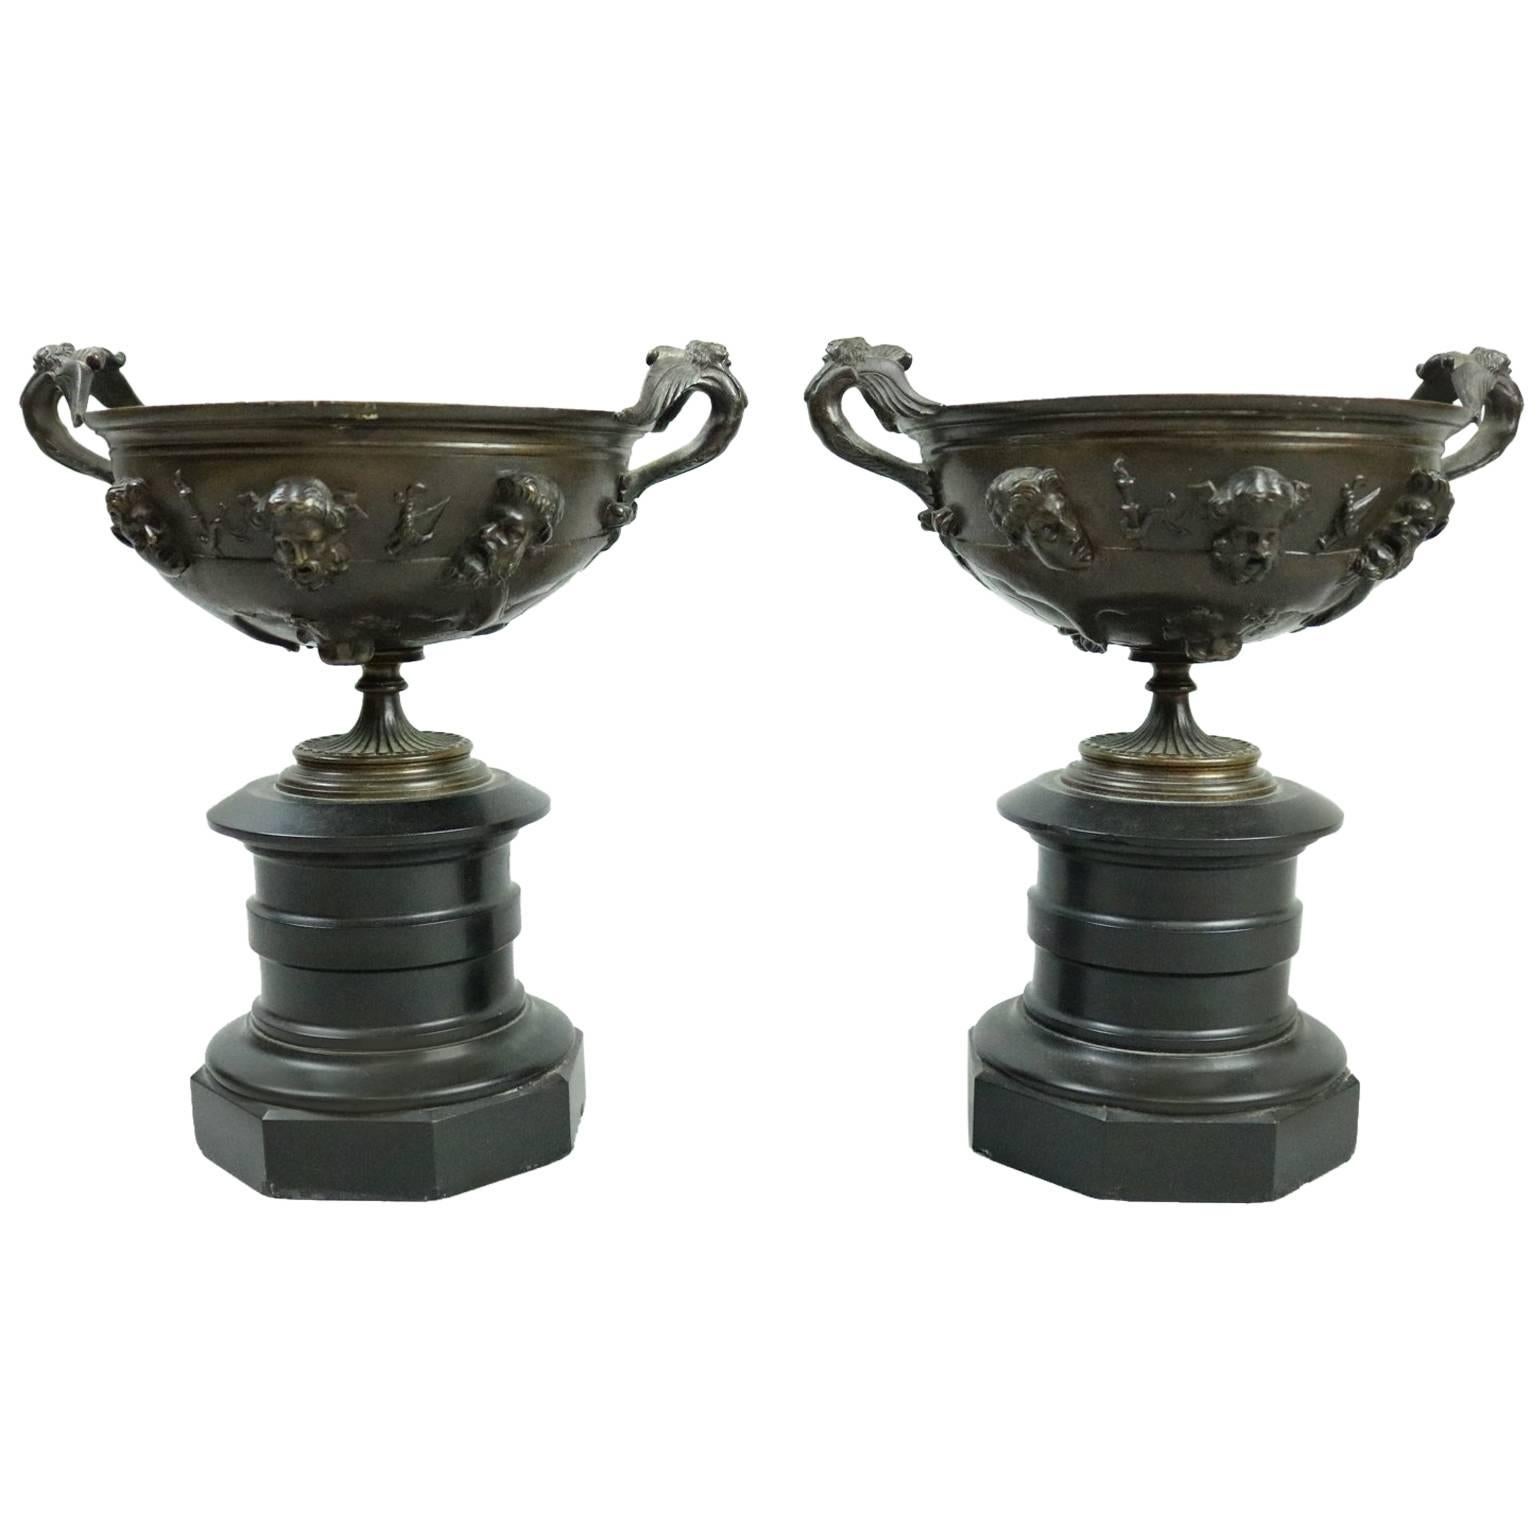 Antique French Neoclassical Bronze and Marble Figural Urn Compotes, circa 1880